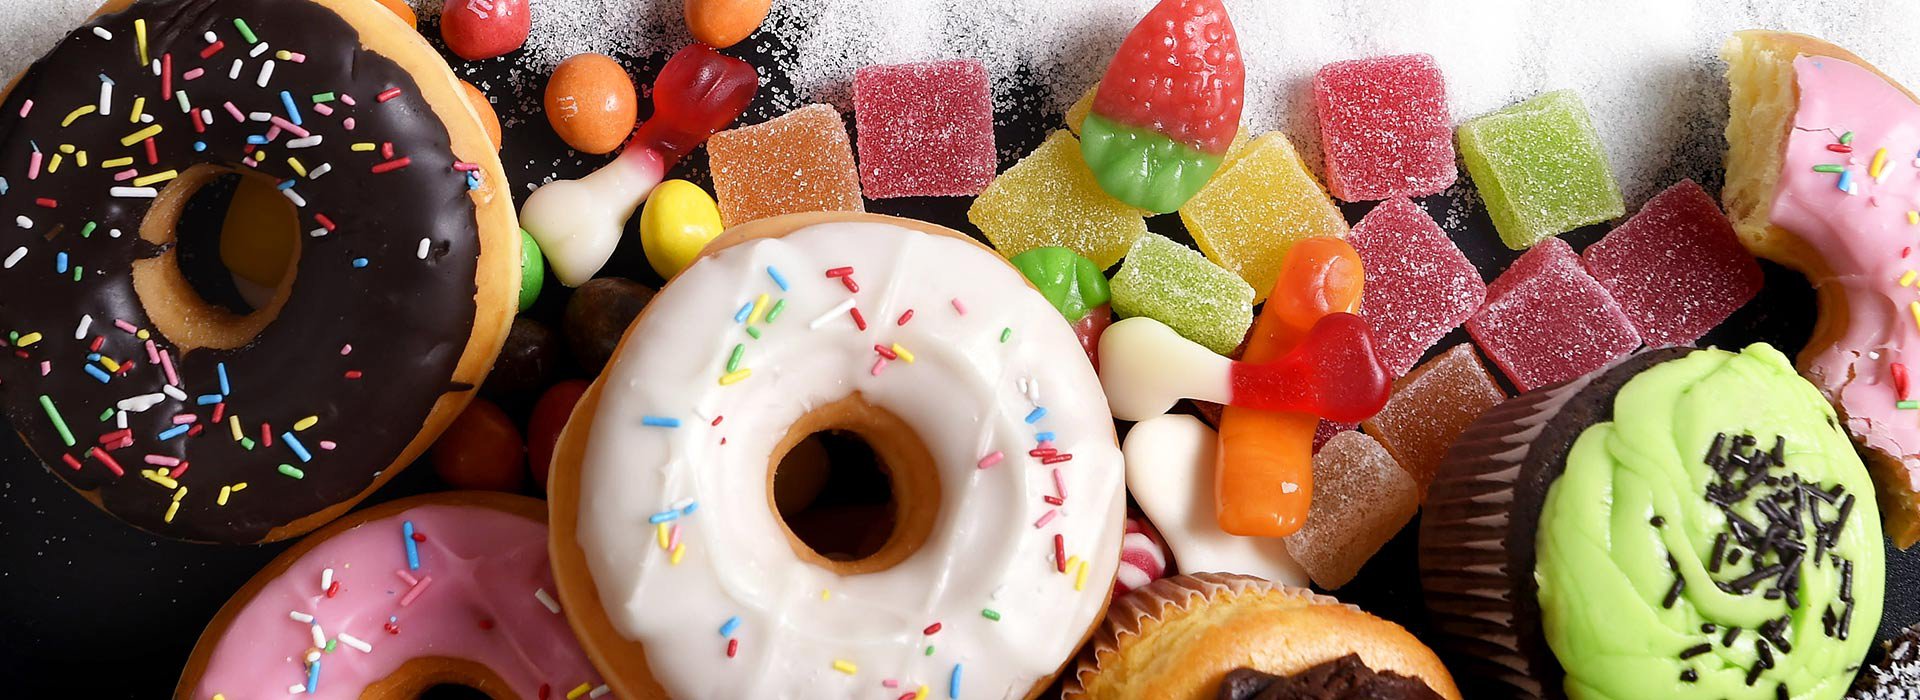 New Image International: Sugar – Just how much is too much?